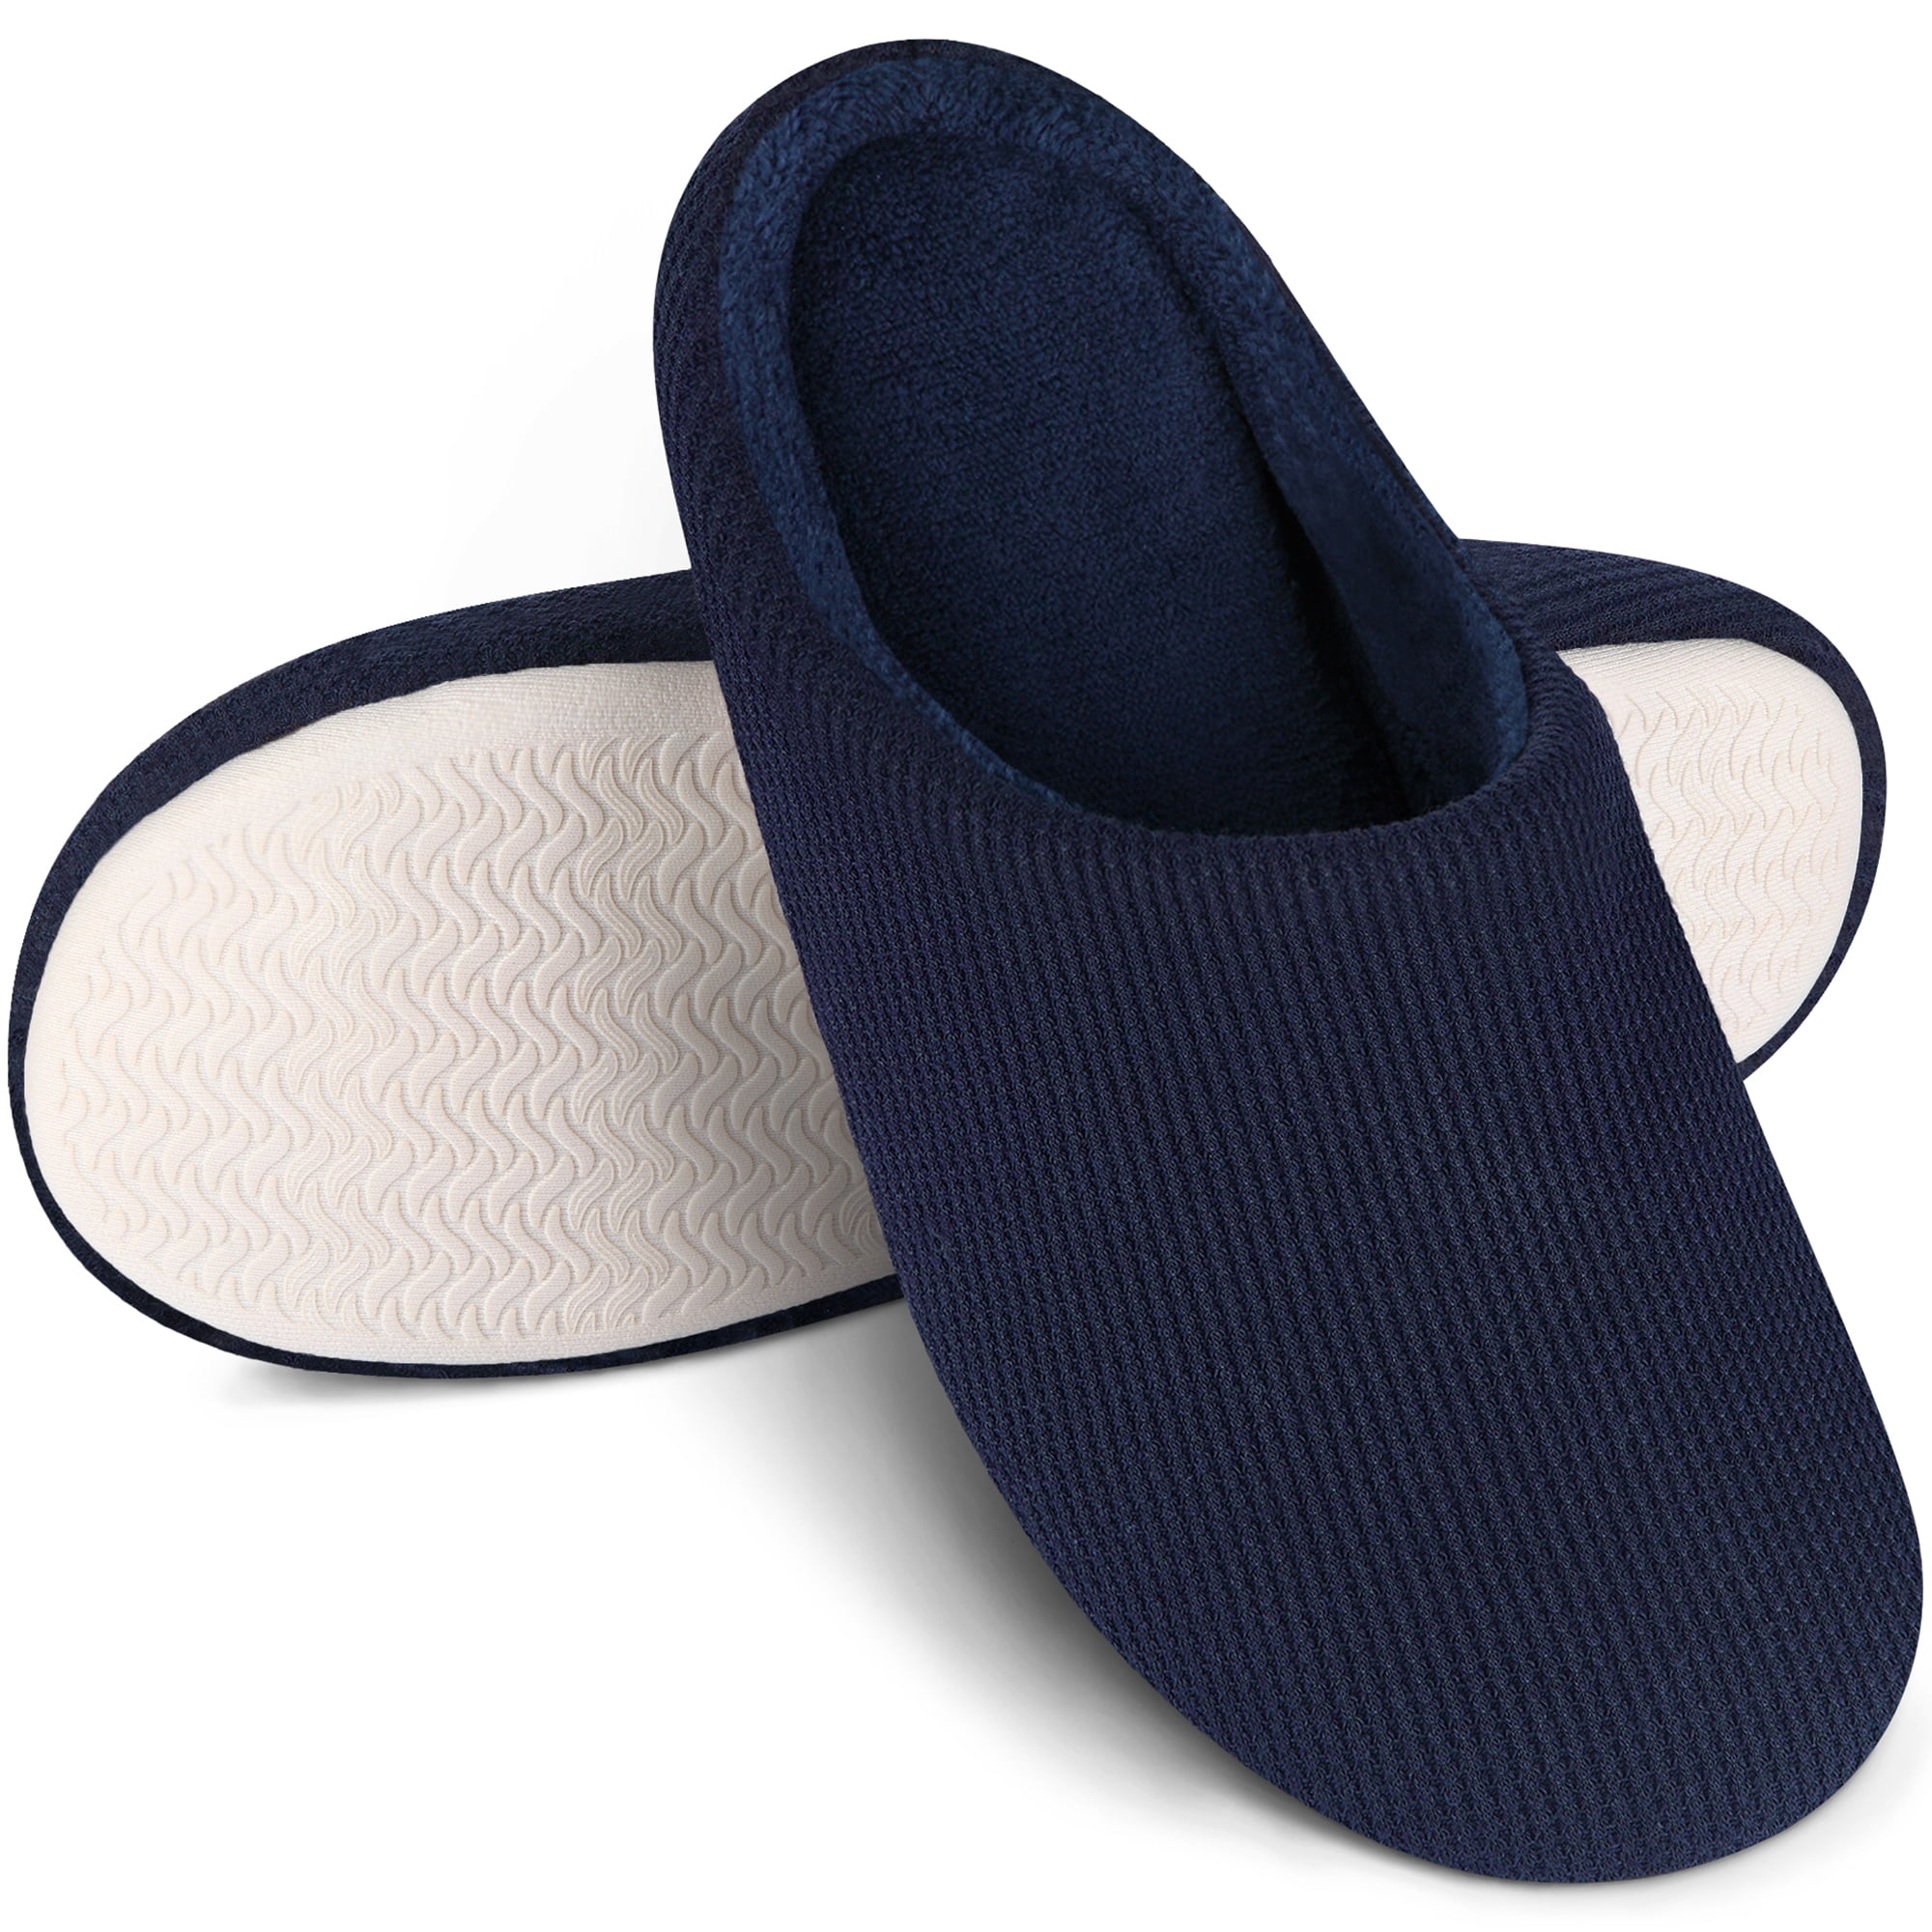 Cosyone 1997 Navy Plaid Memory Foam Indoor/Outdoor Slippers - Men | Best  Price and Reviews | Zulily